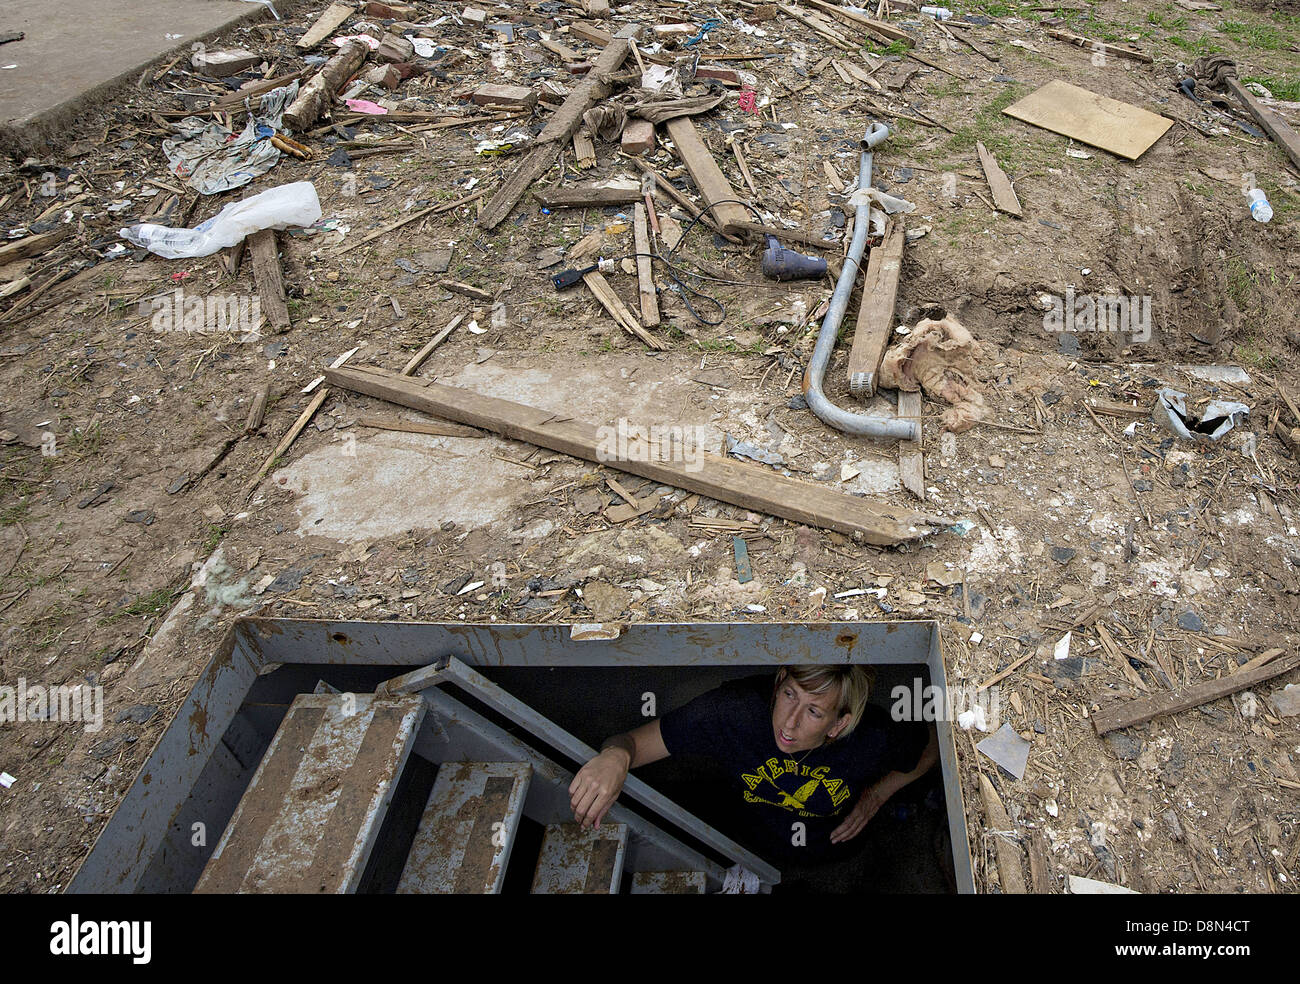 Christie England looks out from the storm shelter that saved her life in the remains of her former home in the aftermath of an EF-5 tornado May 27, 2013 in Moore, Oklahoma. The massive storm with winds exceeding 200 miles per hour tore through the Oklahoma City suburb May 20, 2013, killing at least 24 people, injuring more than 230 and displacing thousands. Stock Photo